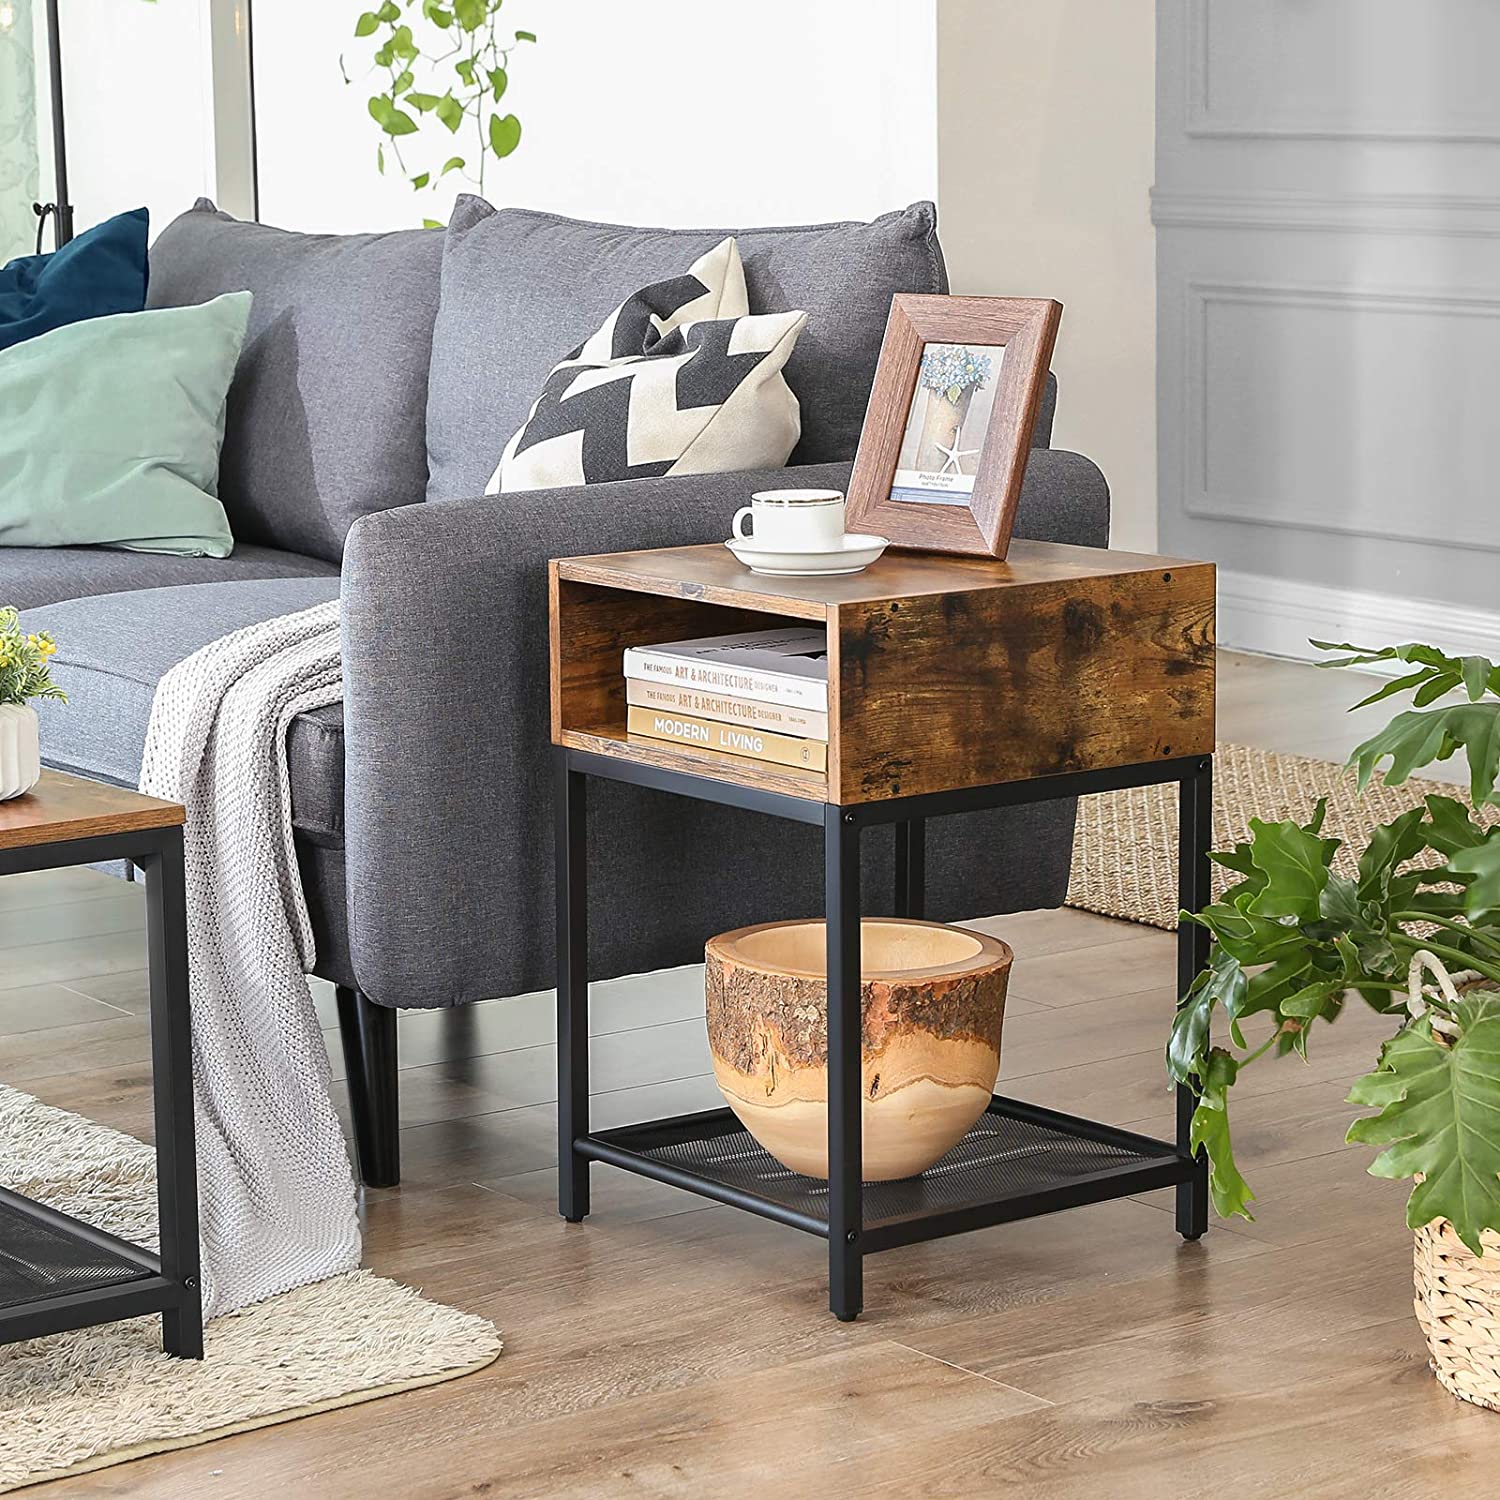 Side Table with Open Compartment and Mesh Shelf Rustic Brown and Black Deals499